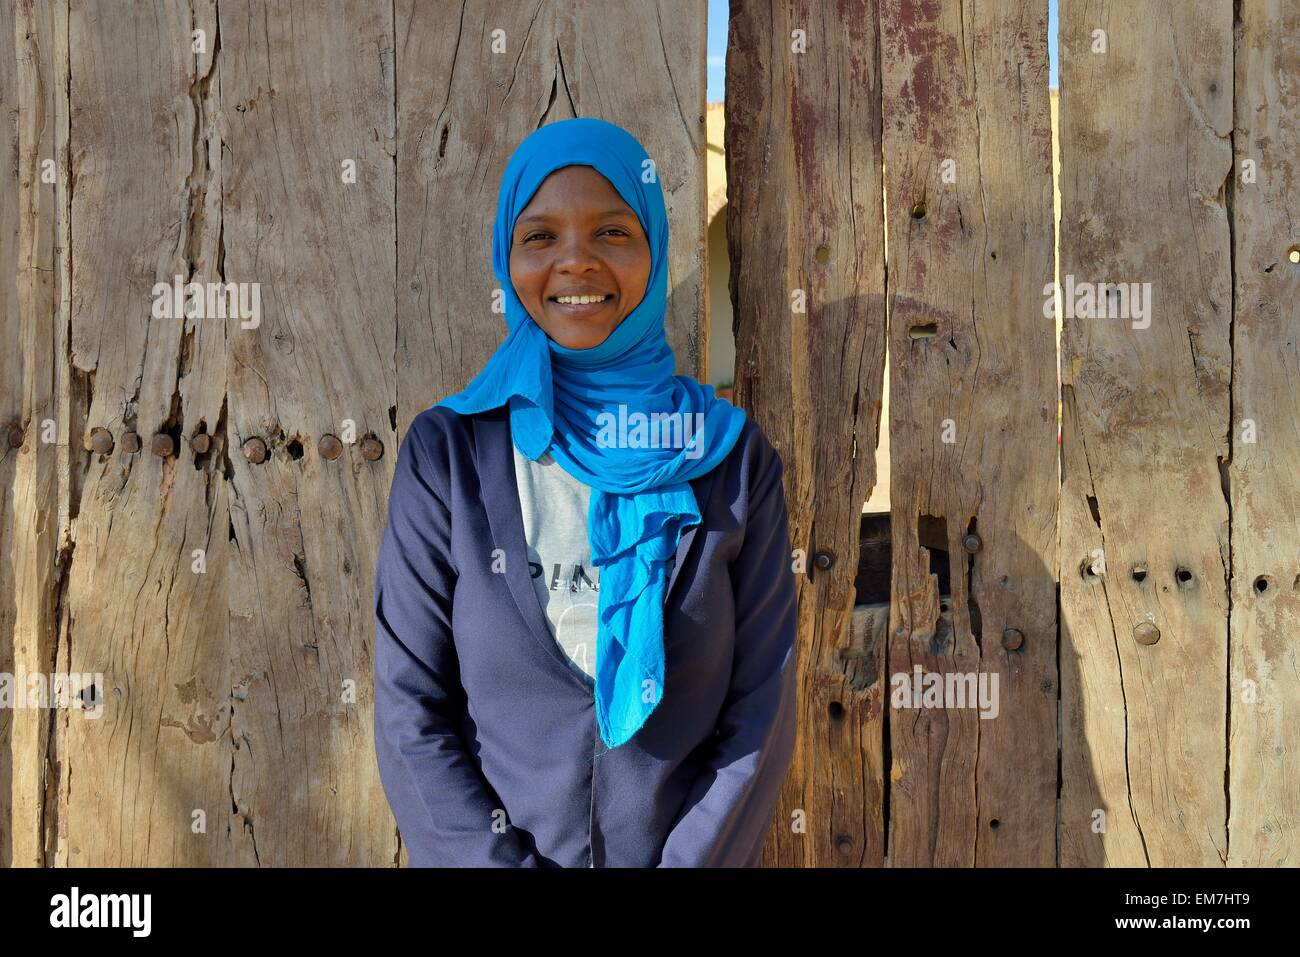 Young woman with headdress, against a wooden door, portrait, Karima, Northern, Nubia, Sudan Stock Photo